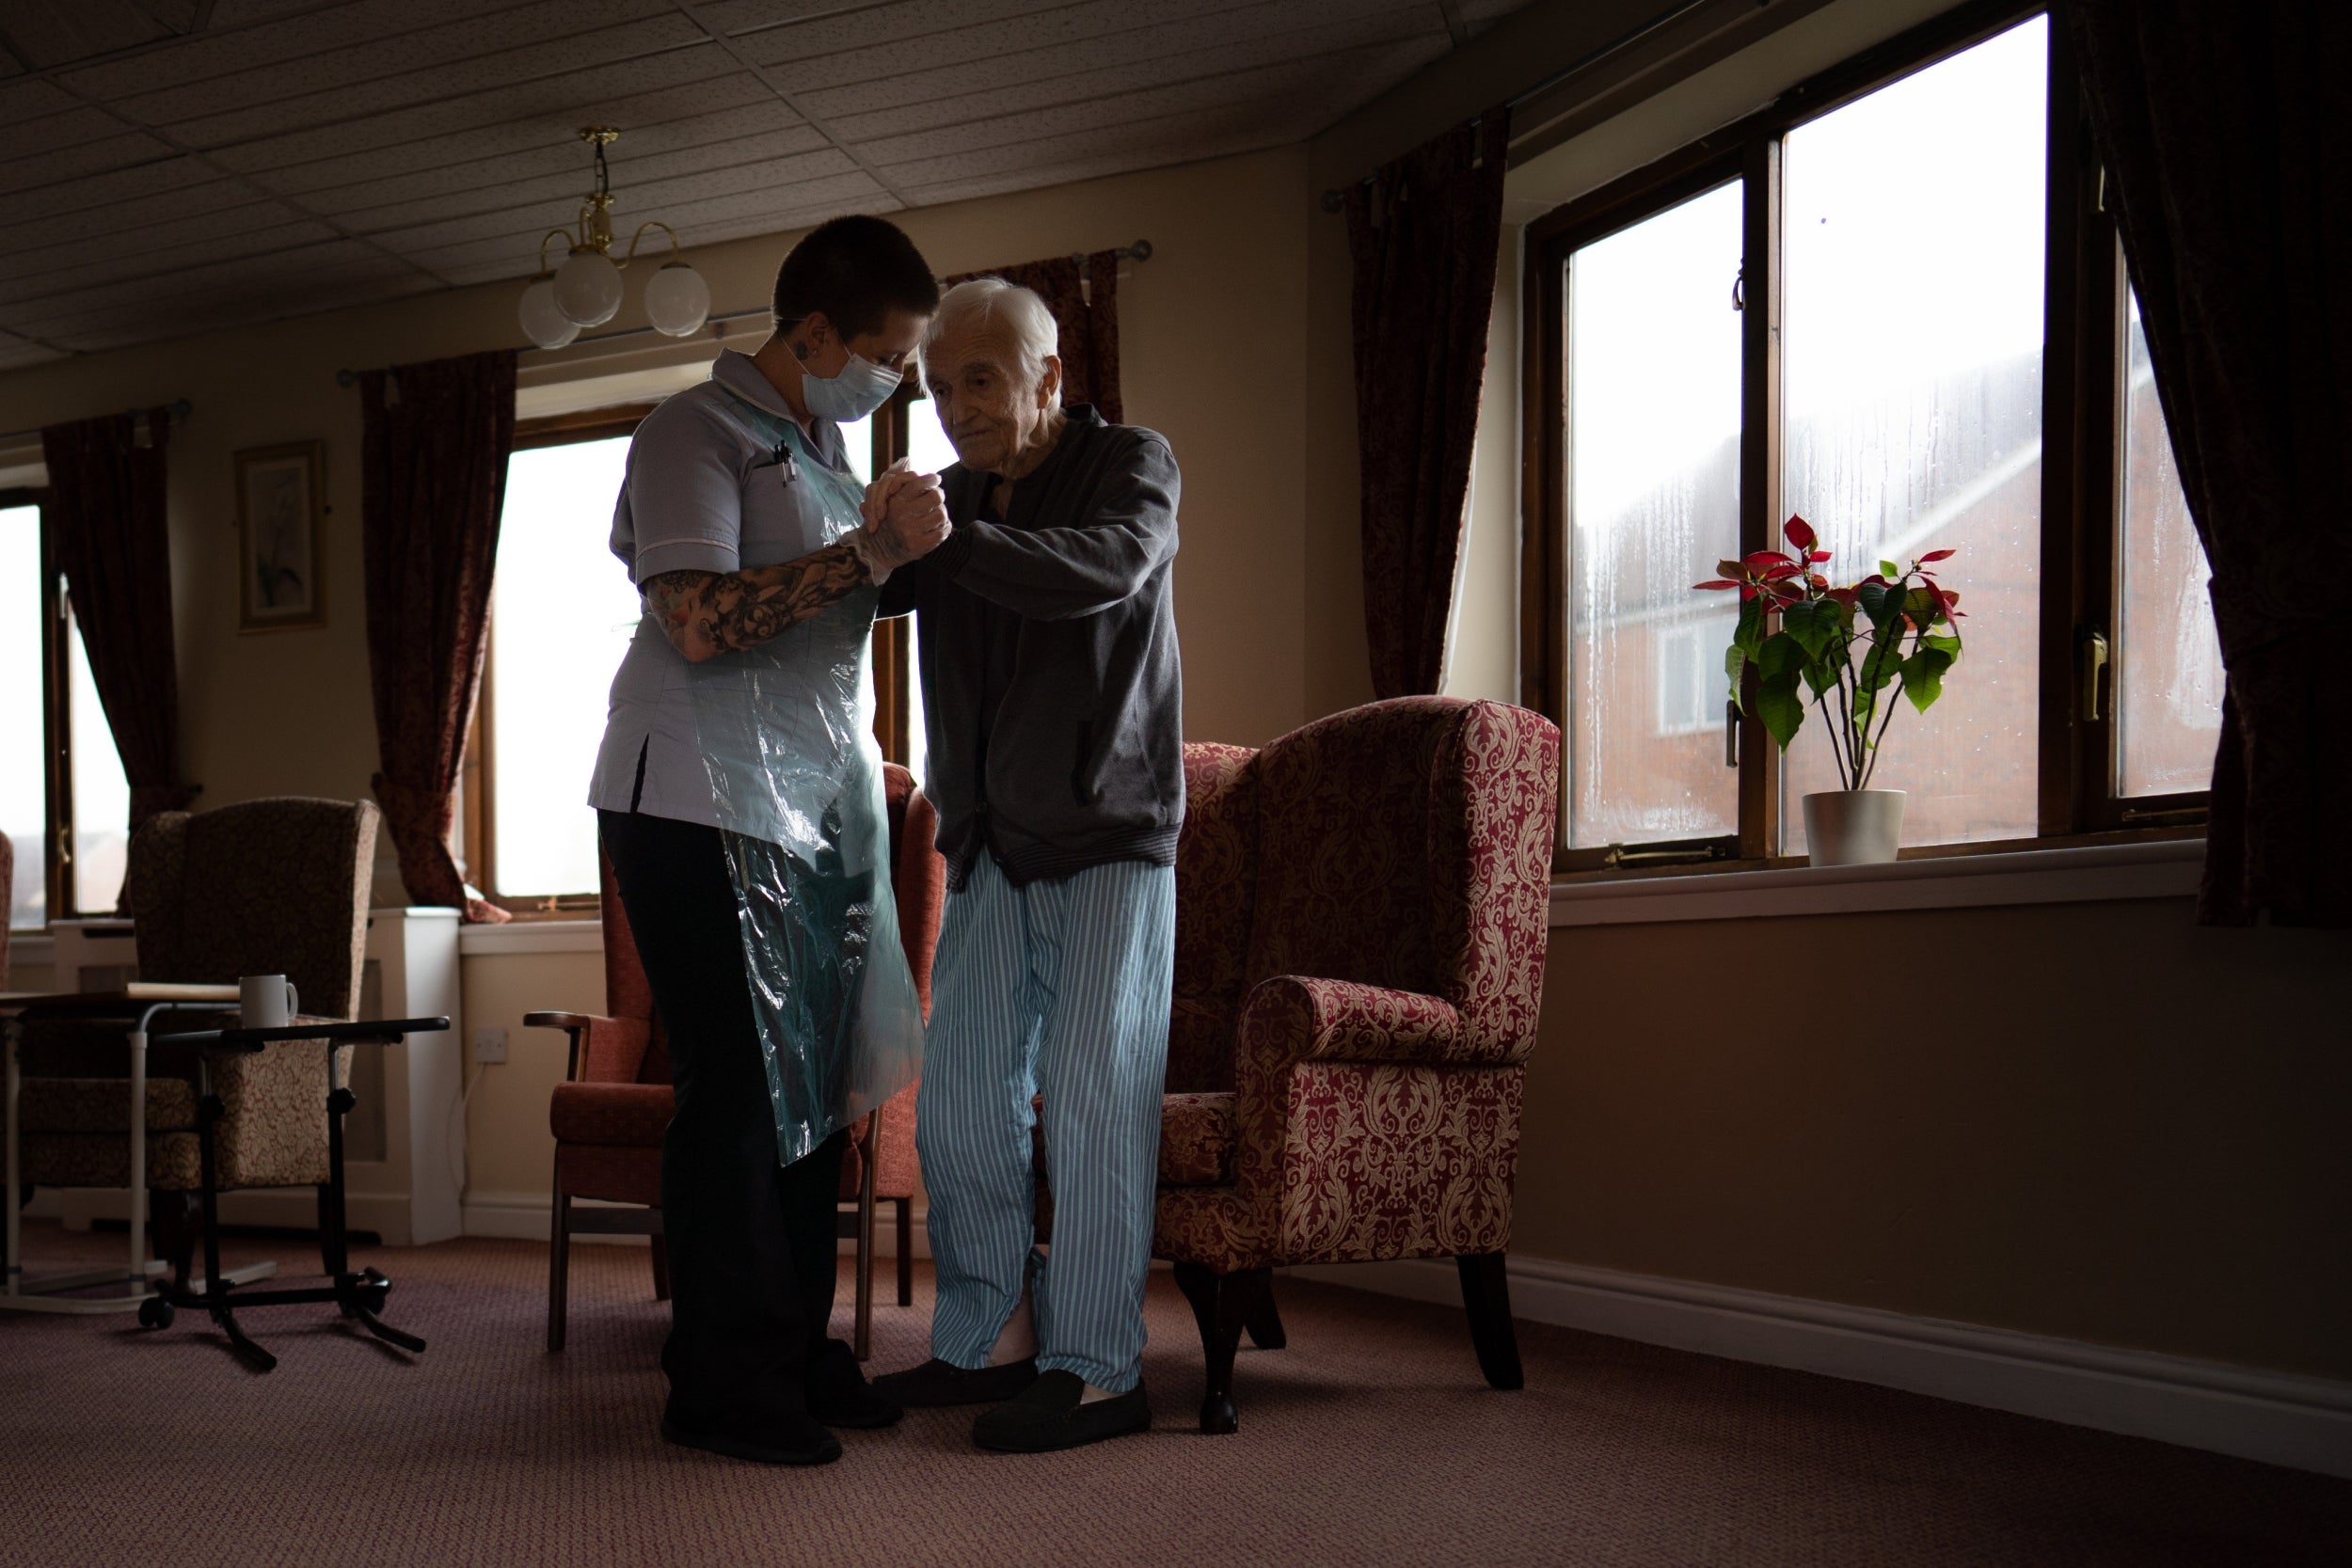 The Croft Care Group said half the beds in one of its homes are unoccupied